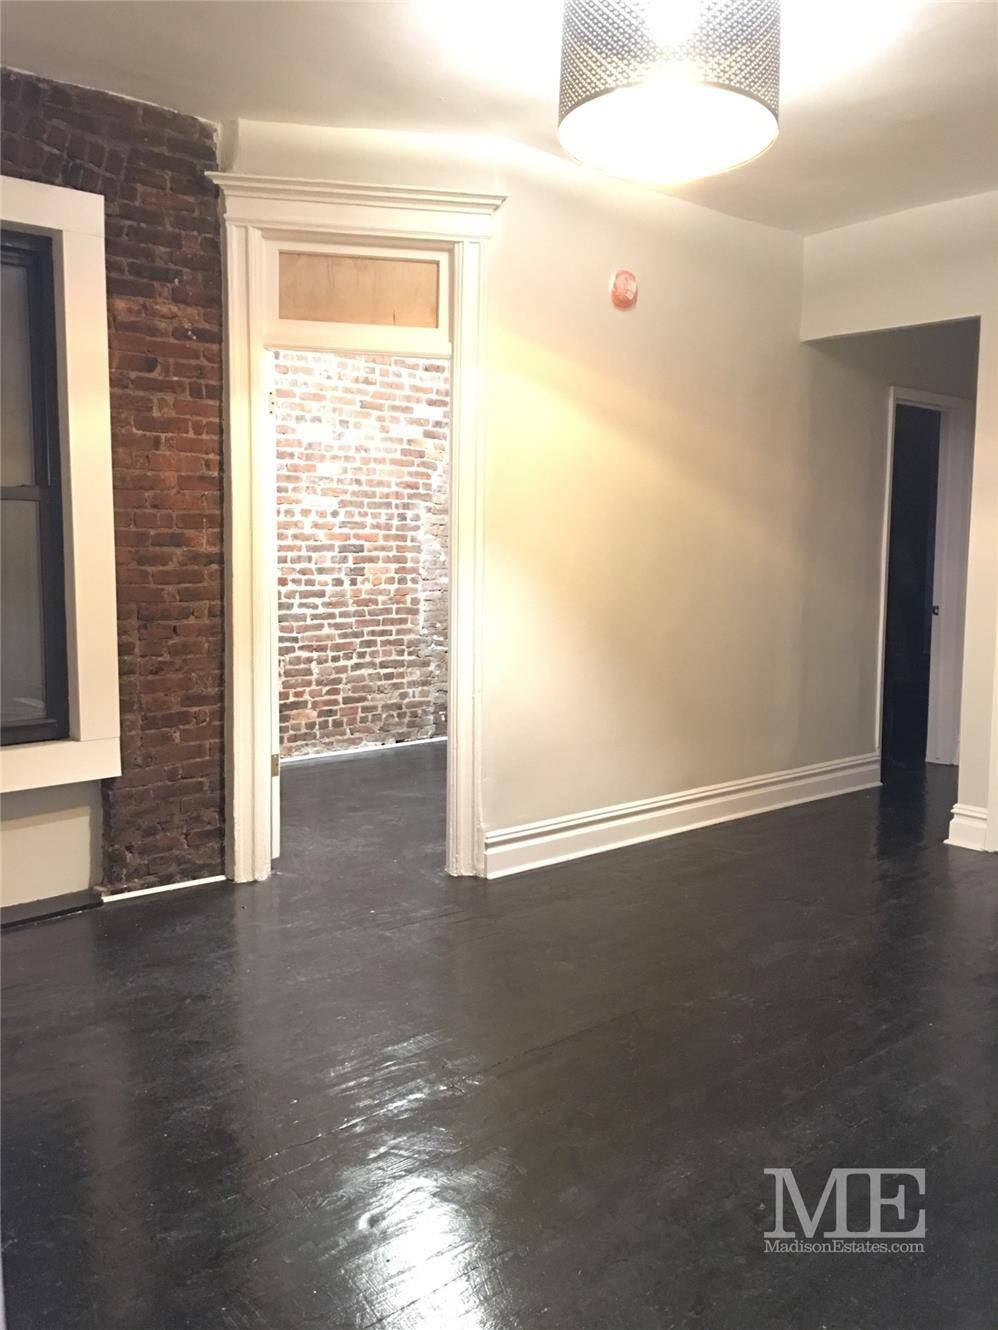 Heat and hot water included Renovated No Fee With Two 2 lease3 Bedroom Apartment in the heart of Sunset Park for modern day Brooklyn living.